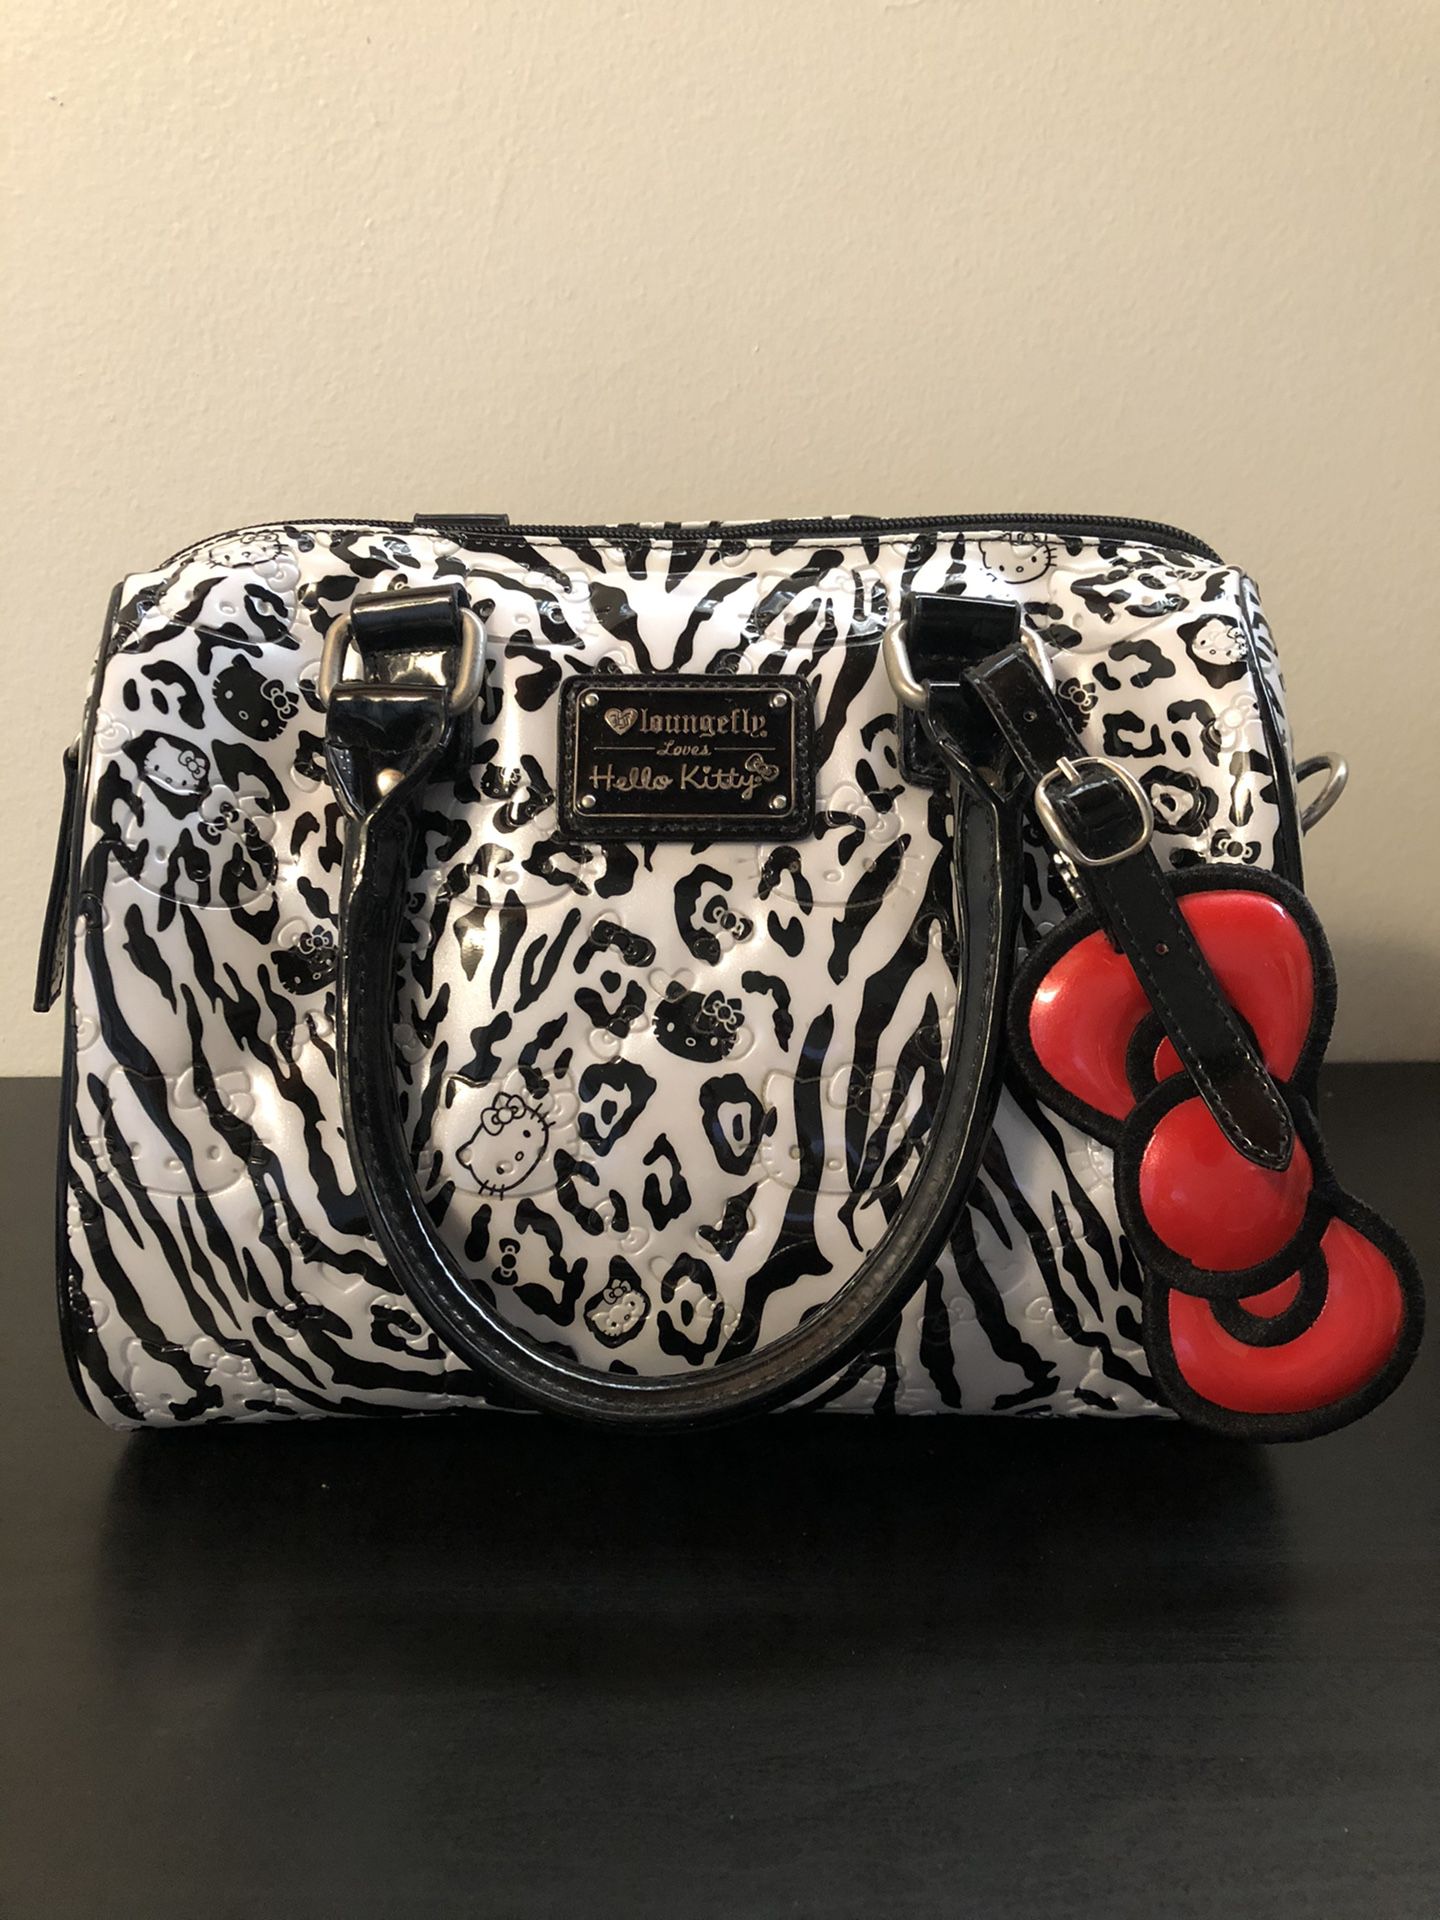 Loungefly Hello Kitty Black And White Leopard And Zebra Print Limited Edition Embossed Purse 